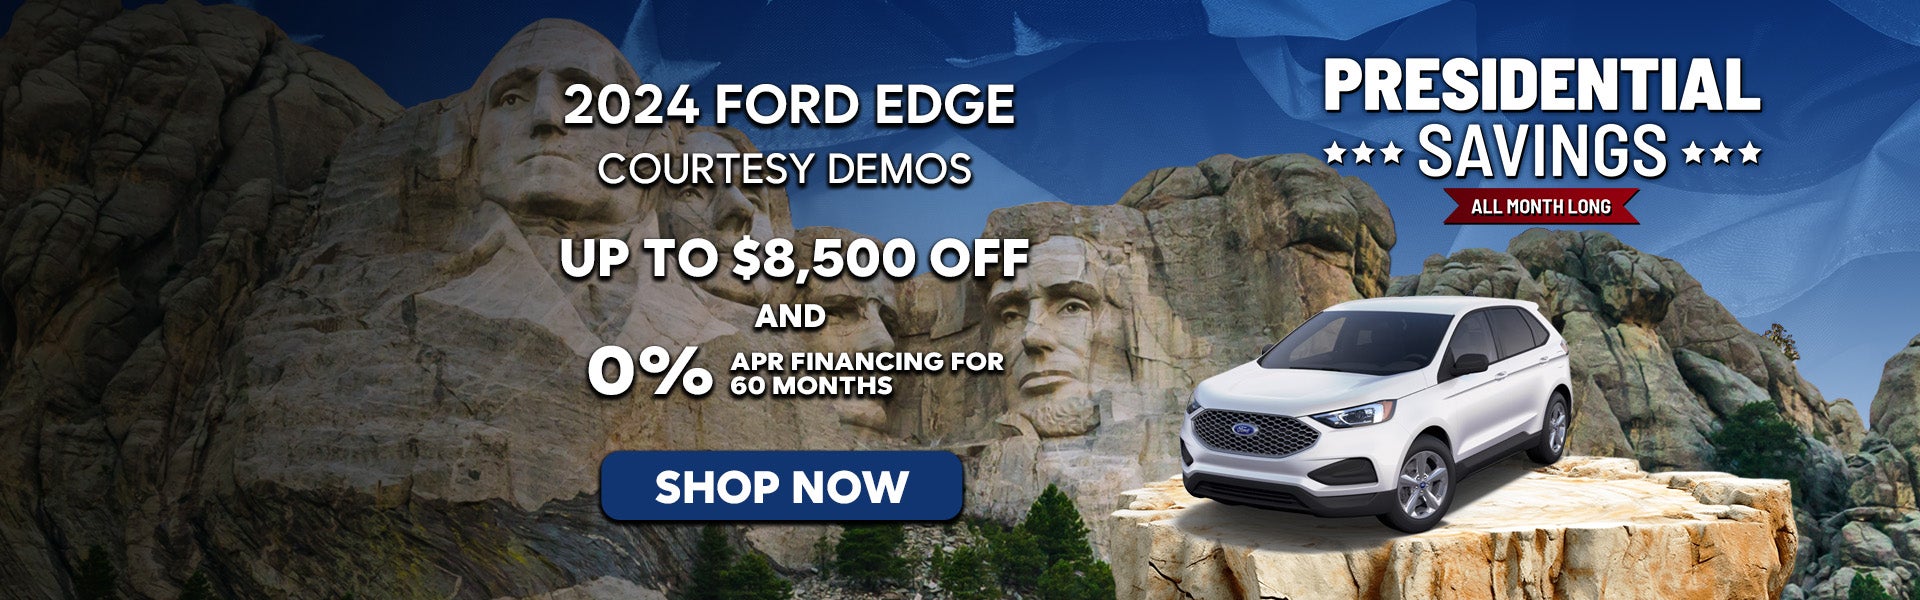 2024 Ford Edge Courtesy Demo Special Offer